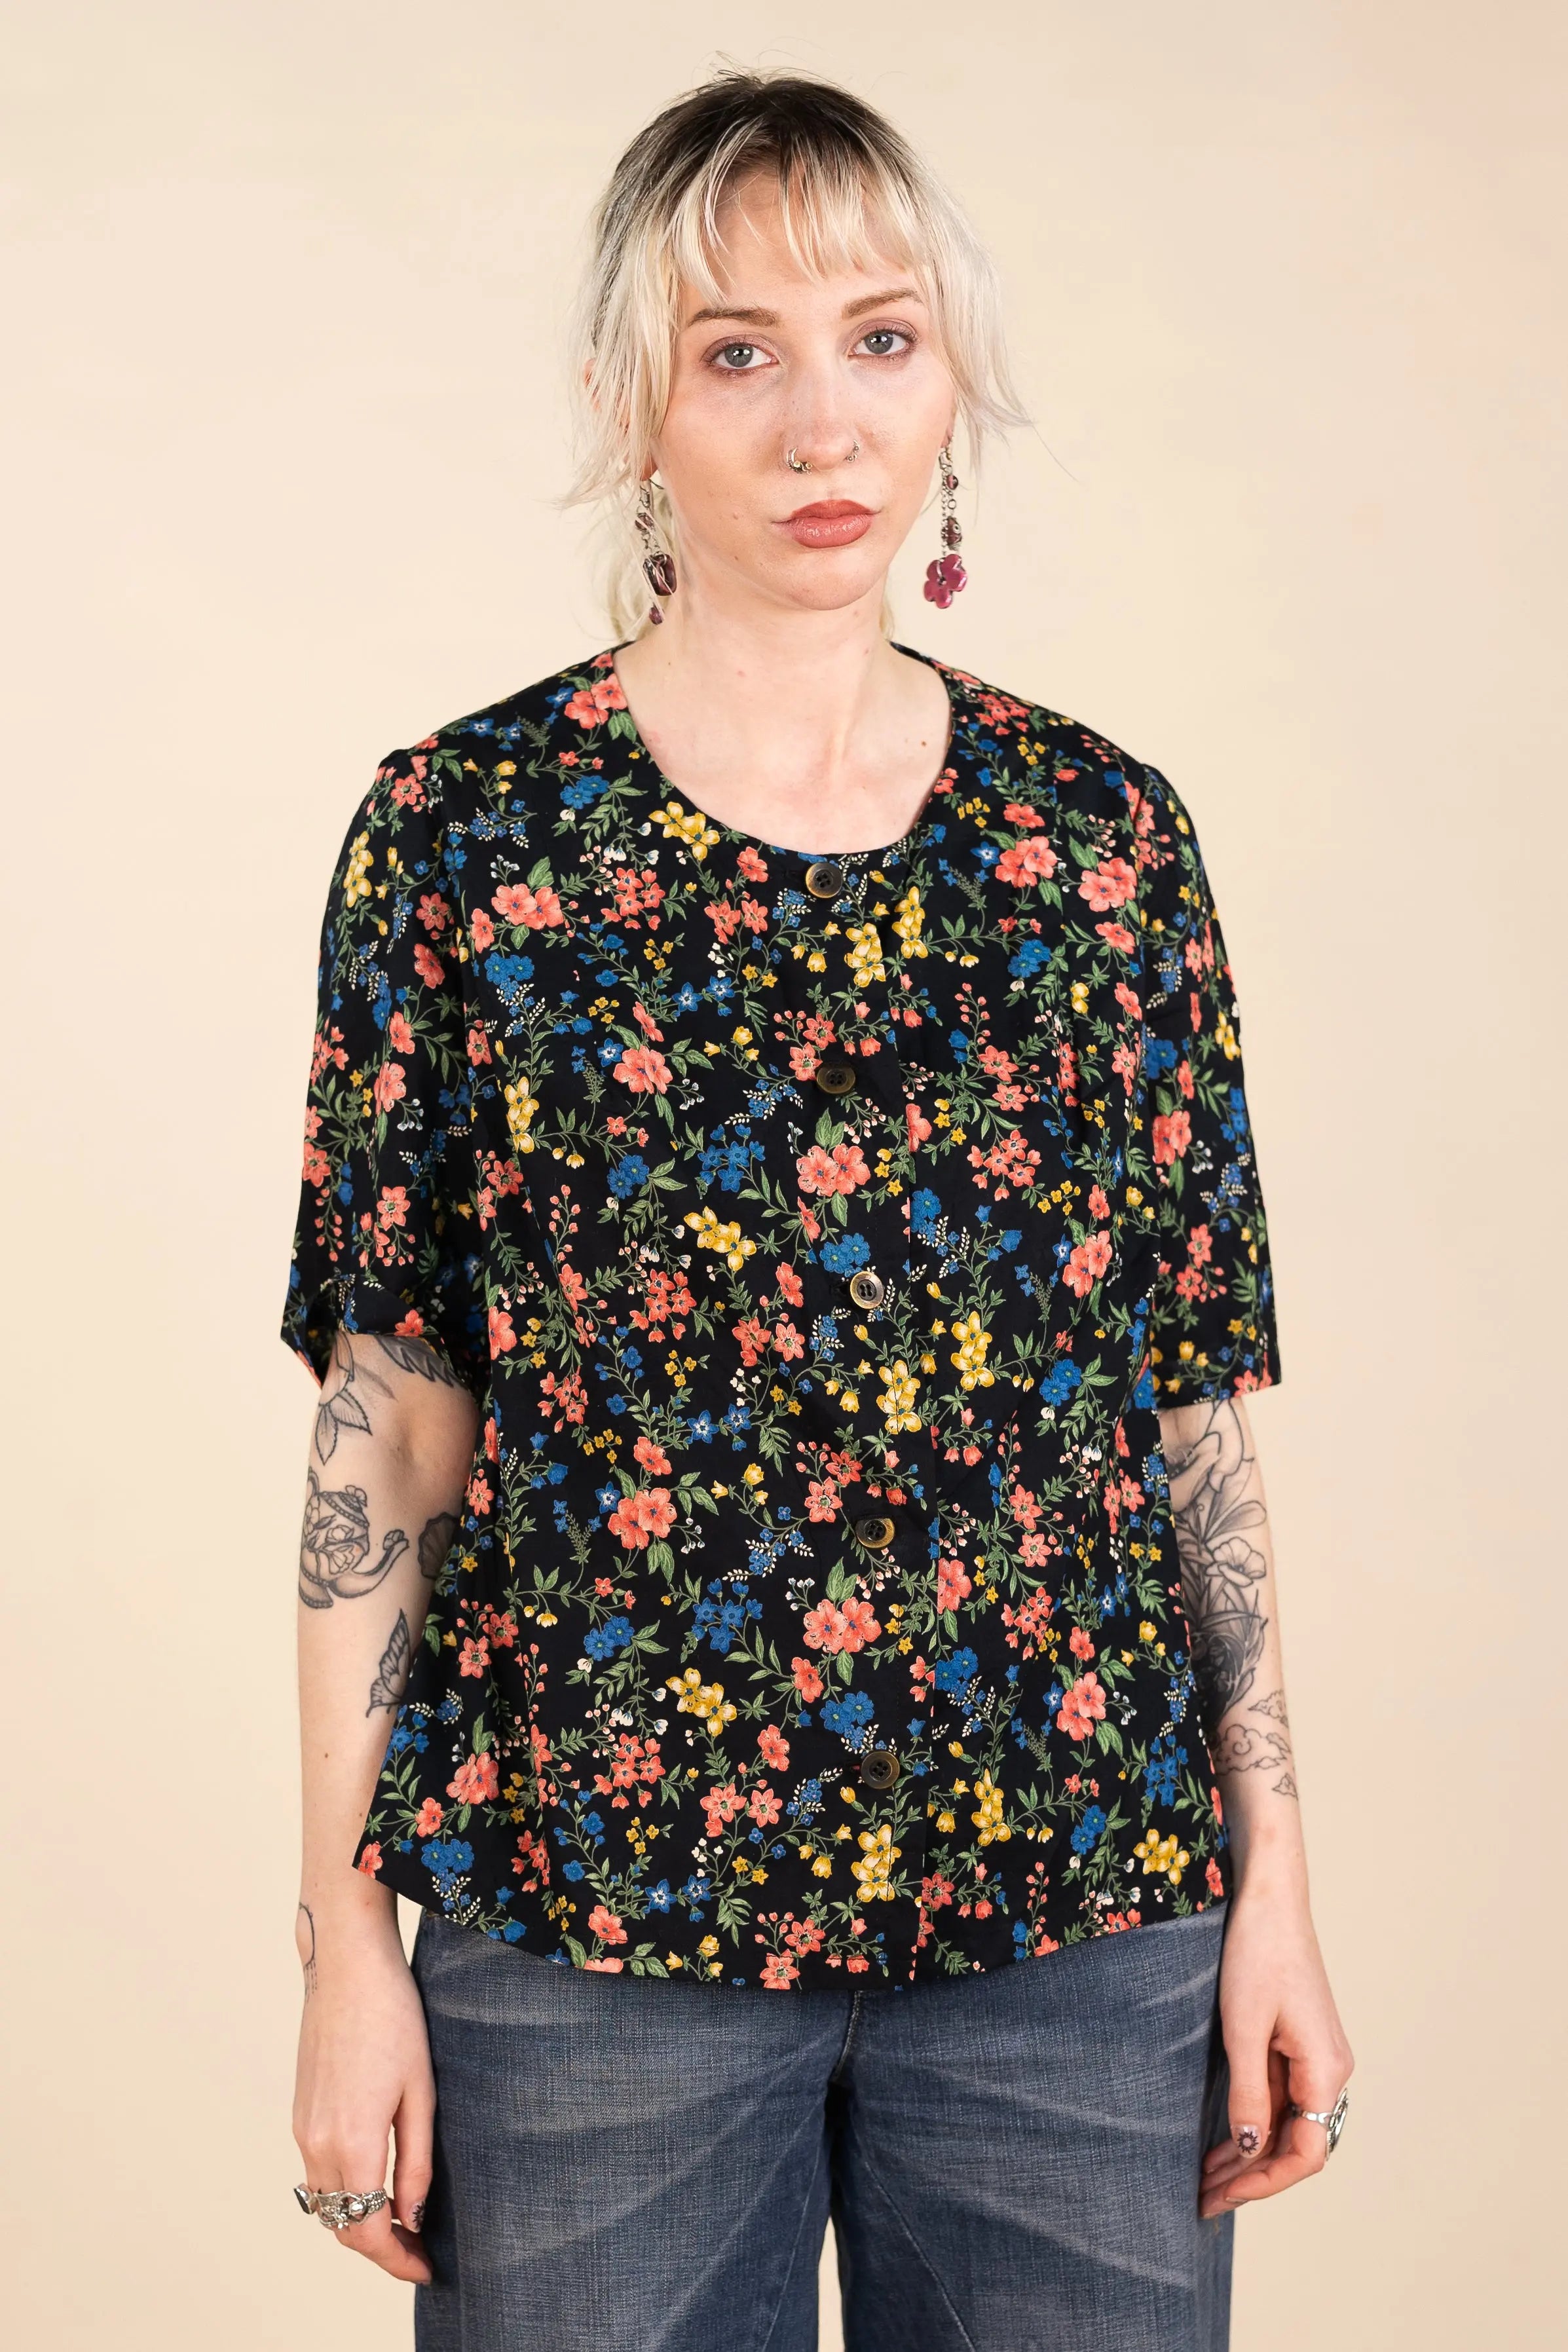 Handmade - Handmade Floral Top- ThriftTale.com - Vintage and second handclothing